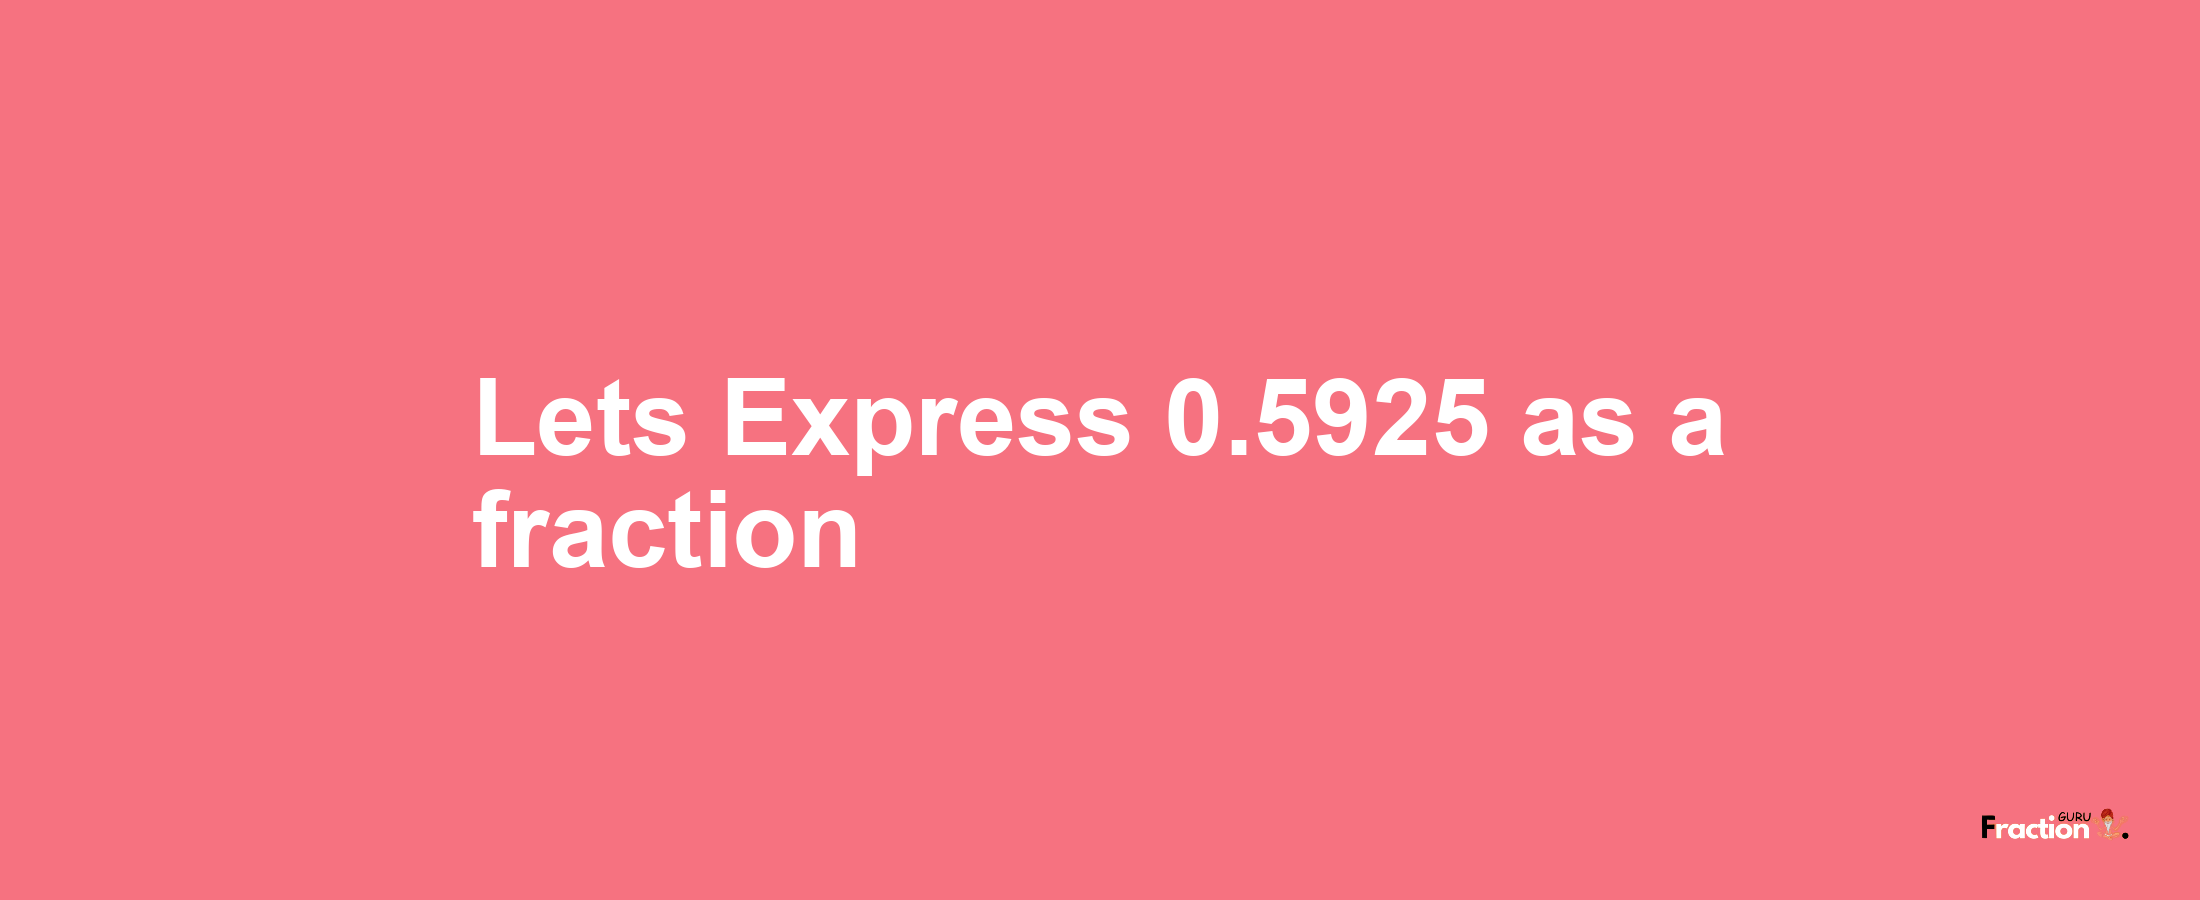 Lets Express 0.5925 as afraction